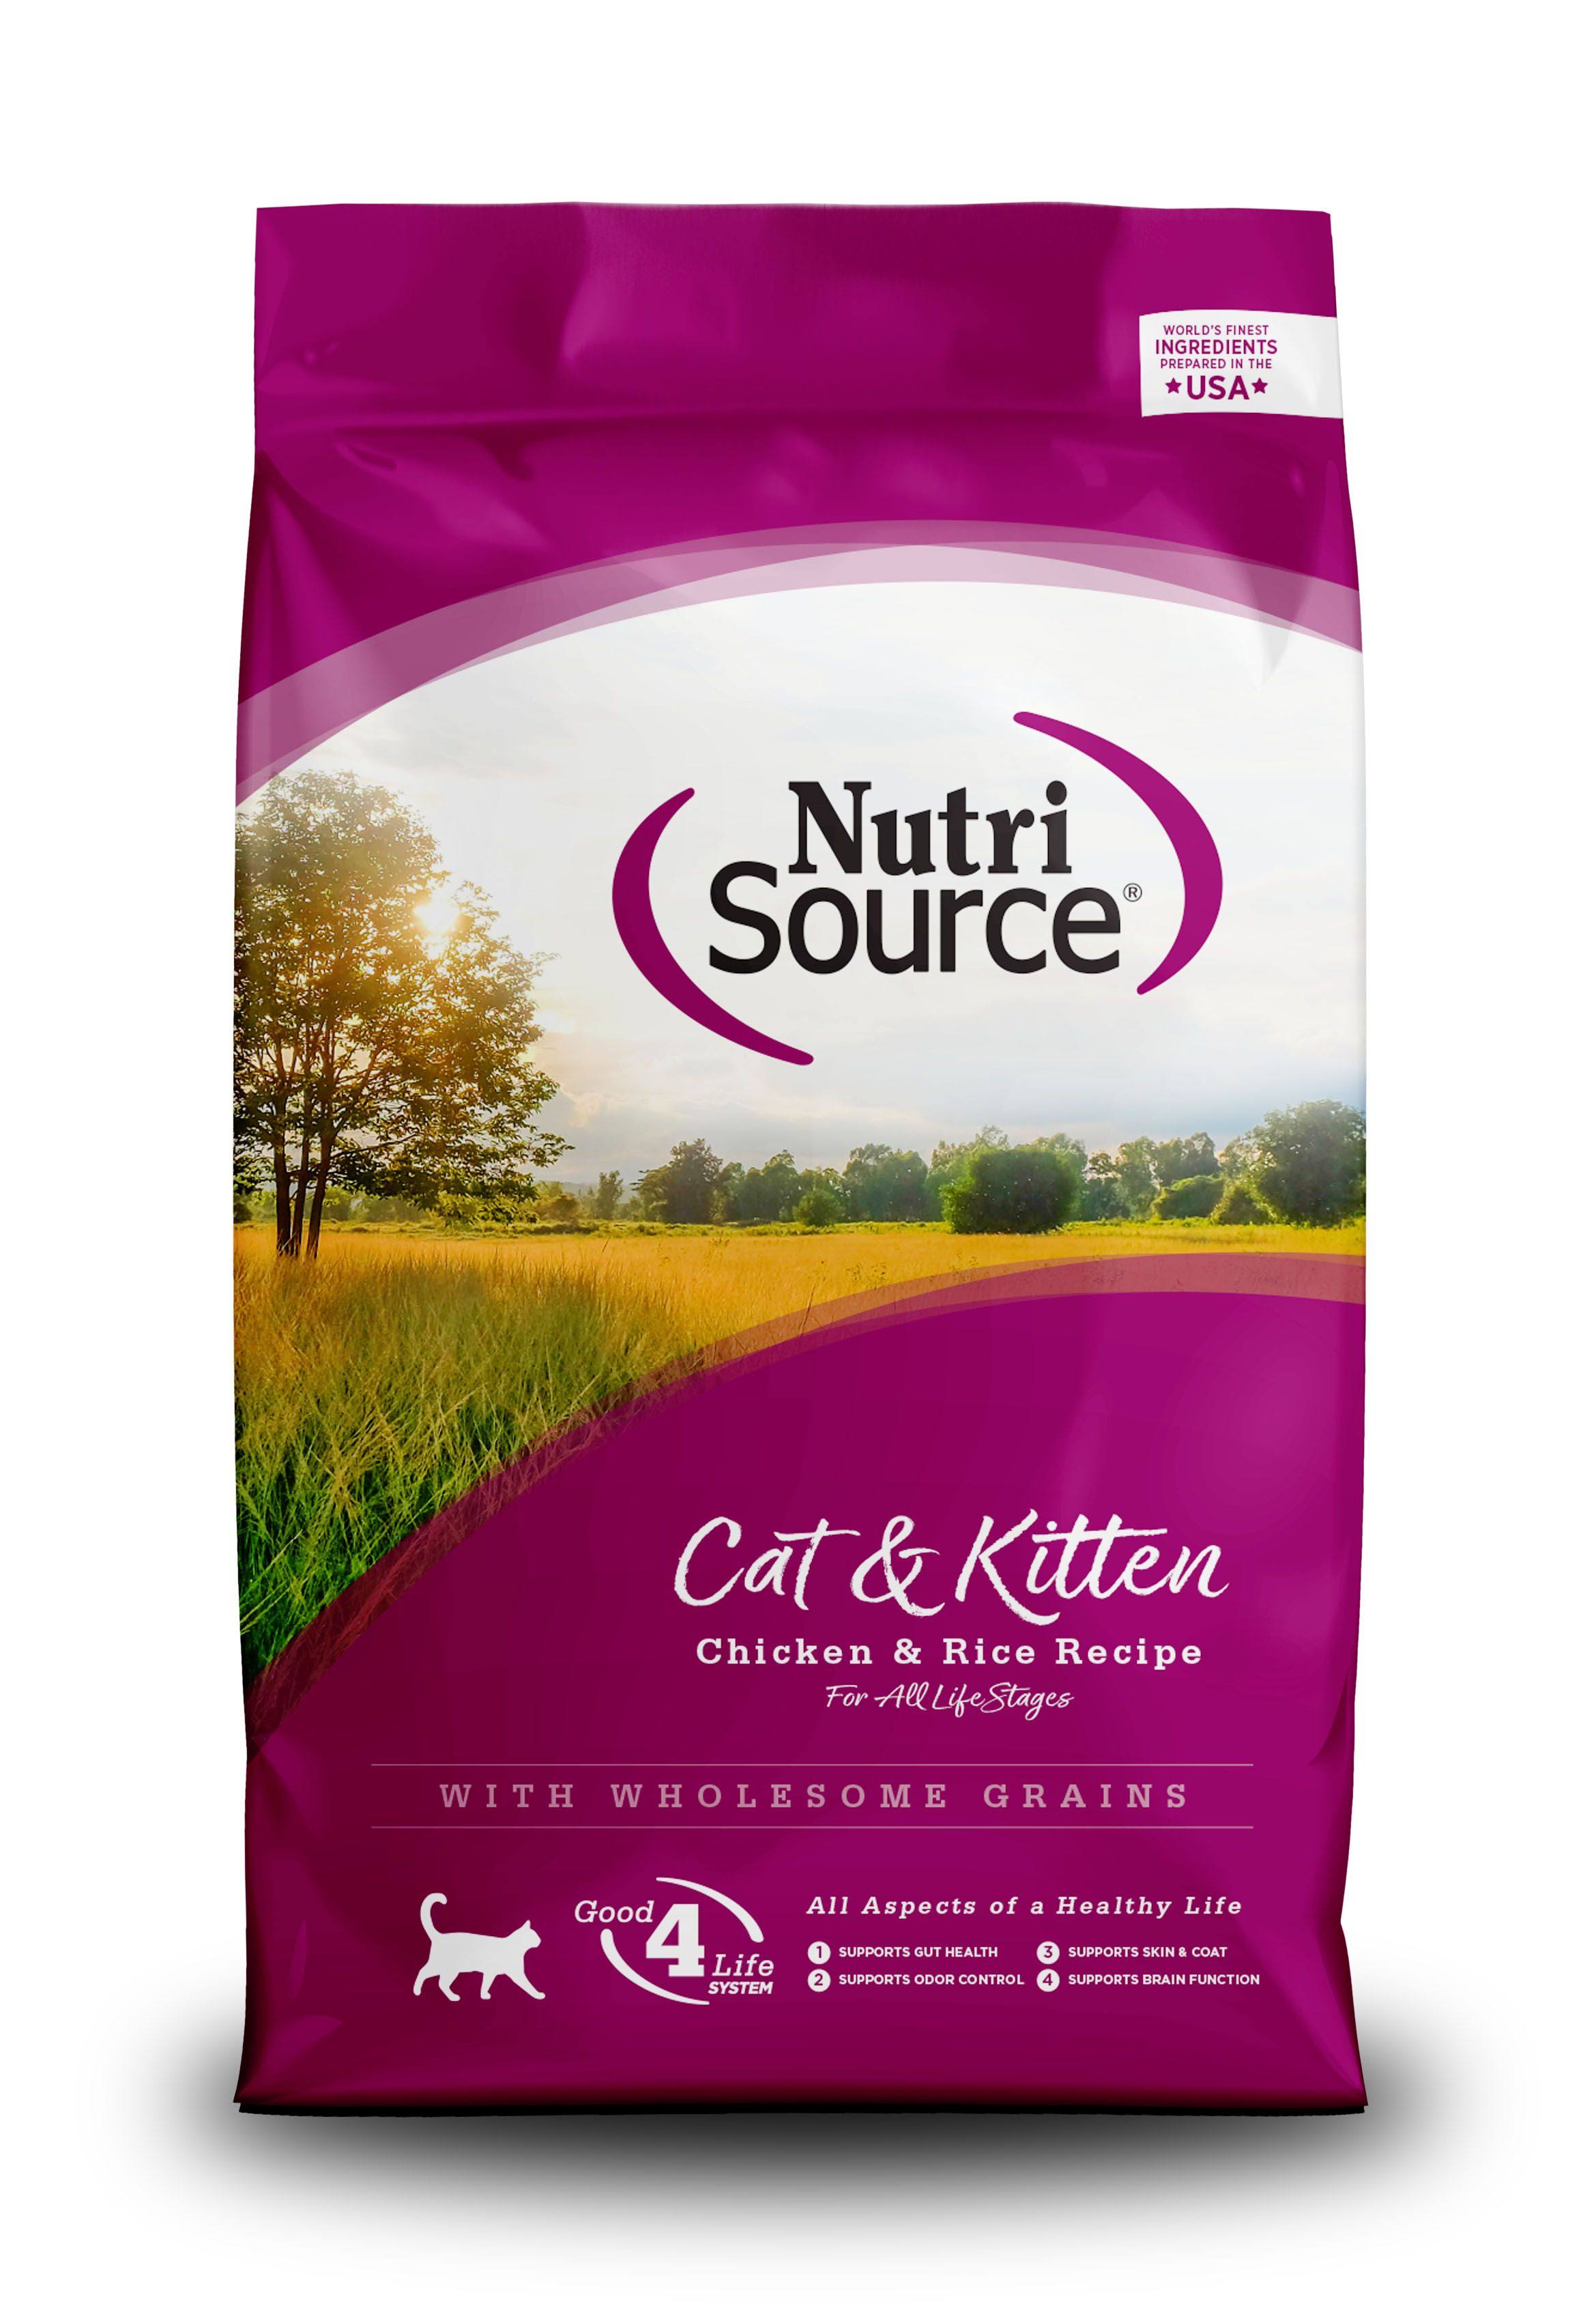 NutriSource Chicken and Rice Cat Kitten Food - 6.6lb